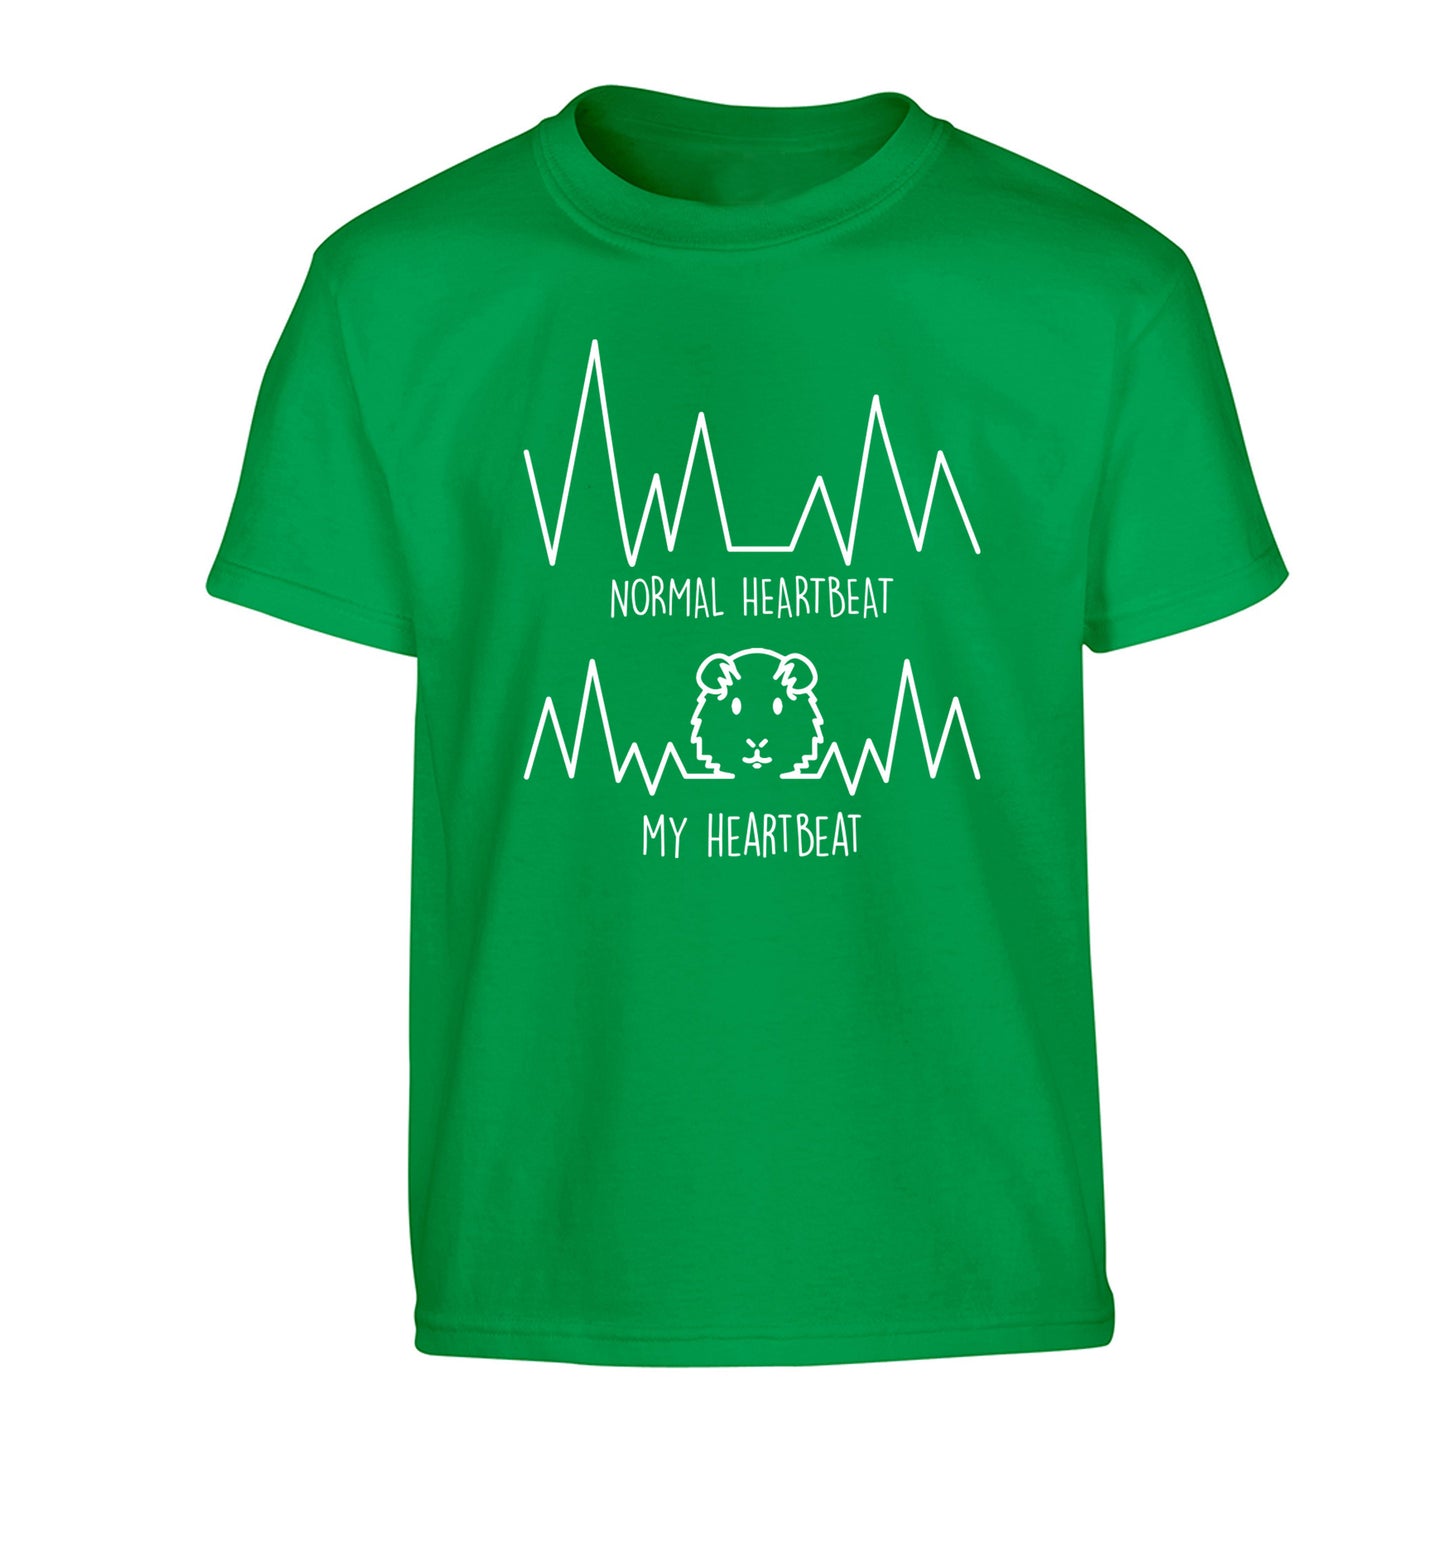 Normal heartbeat vs my heartbeat guinea pig lover Children's green Tshirt 12-14 Years